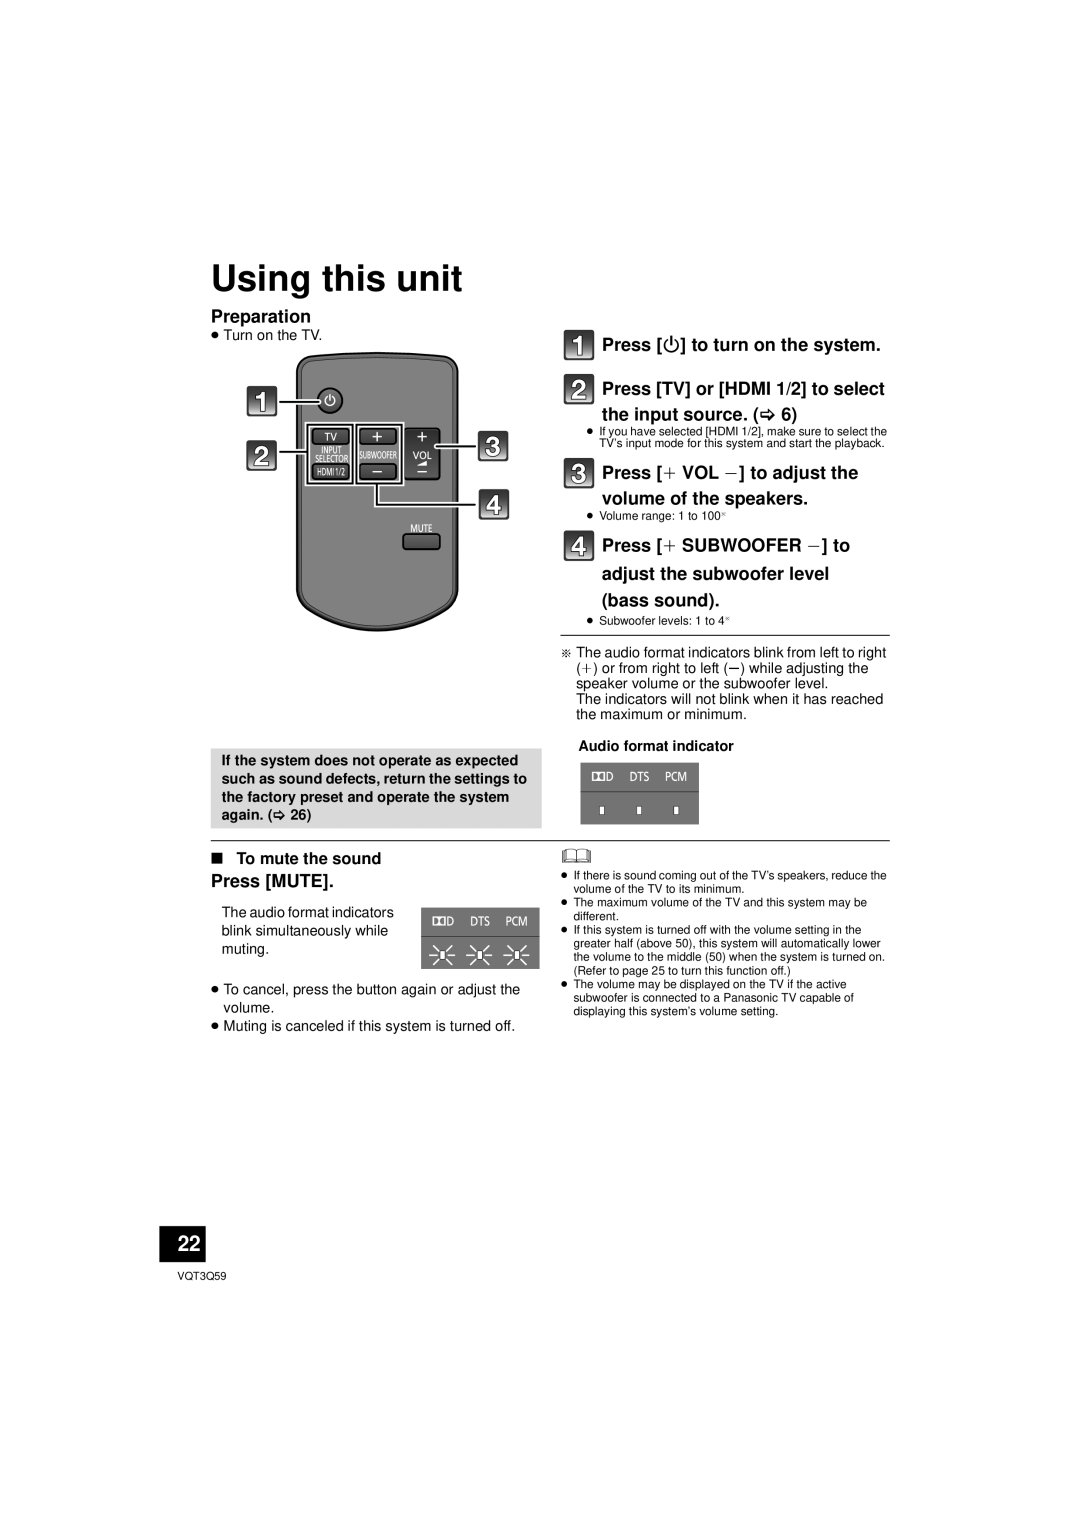 Panasonic SC-HTB15 owner manual Using this unit, Press Í to turn on the system, Press MUTE, Preparation, To mute the sound 